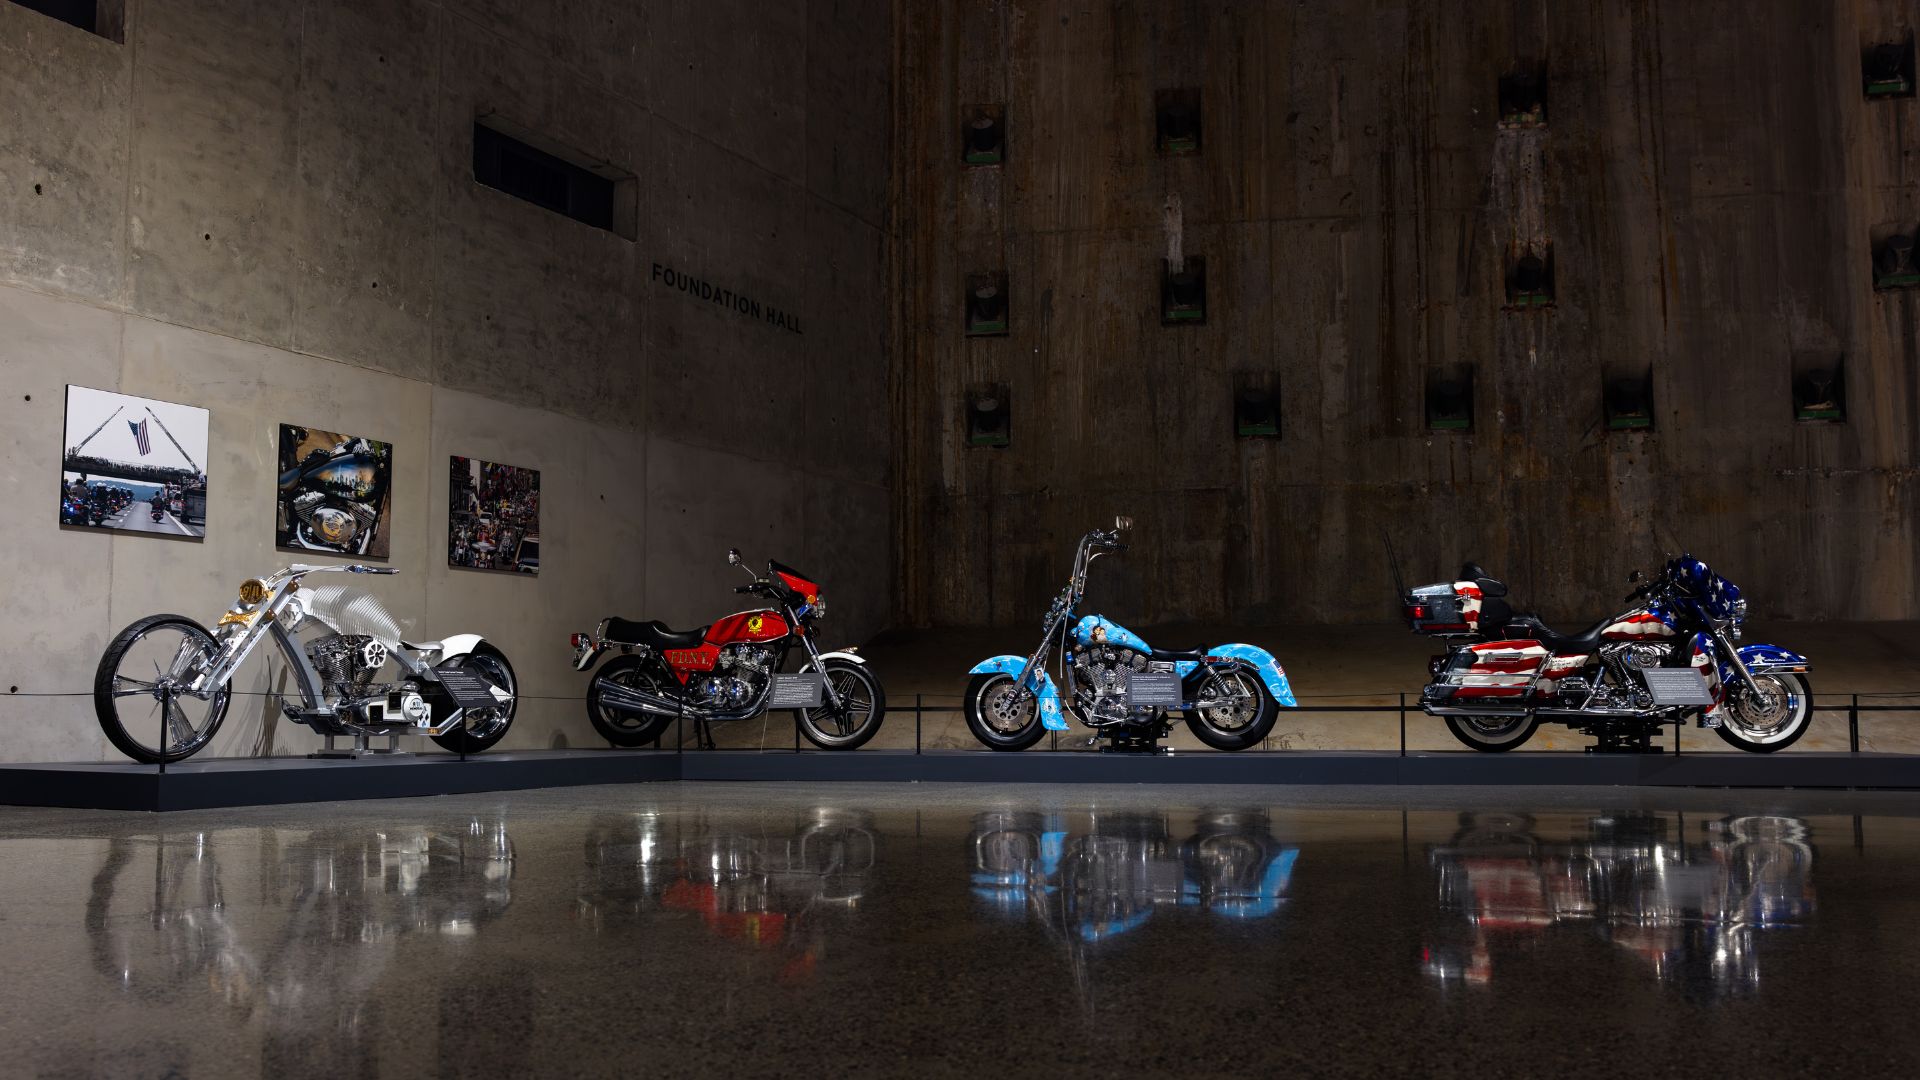 Four commemorative motorcycles lined up on display at the Museum